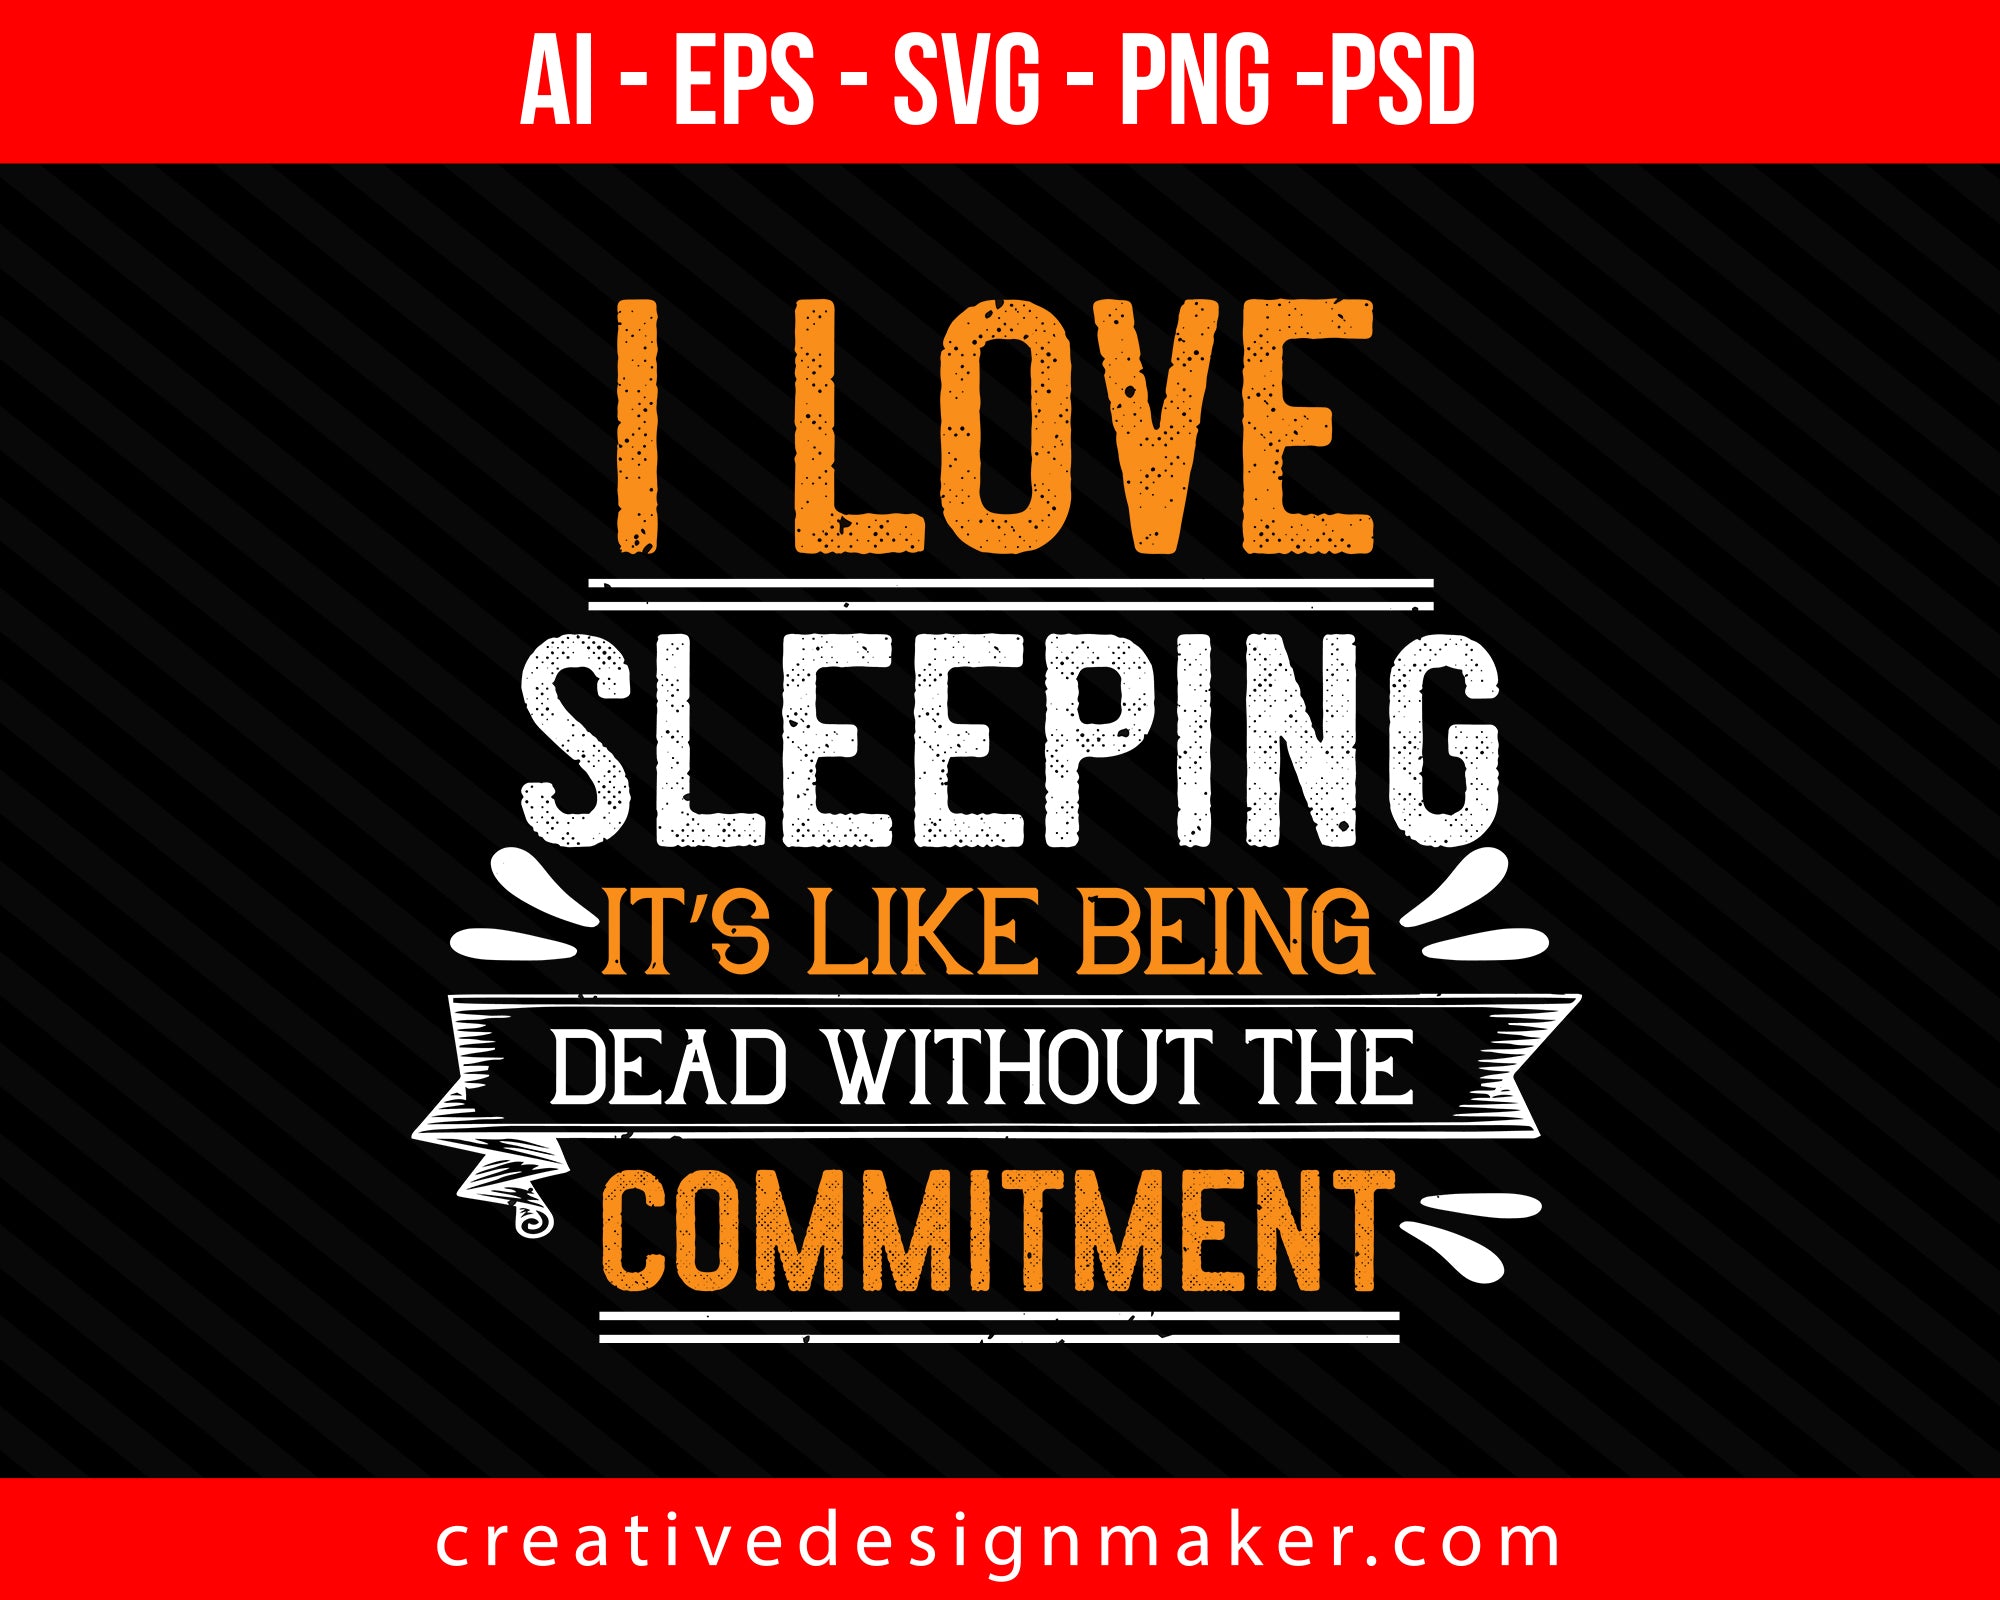 I love sleeping it’s like being dead without the commitment Print Ready Editable T-Shirt SVG Design!